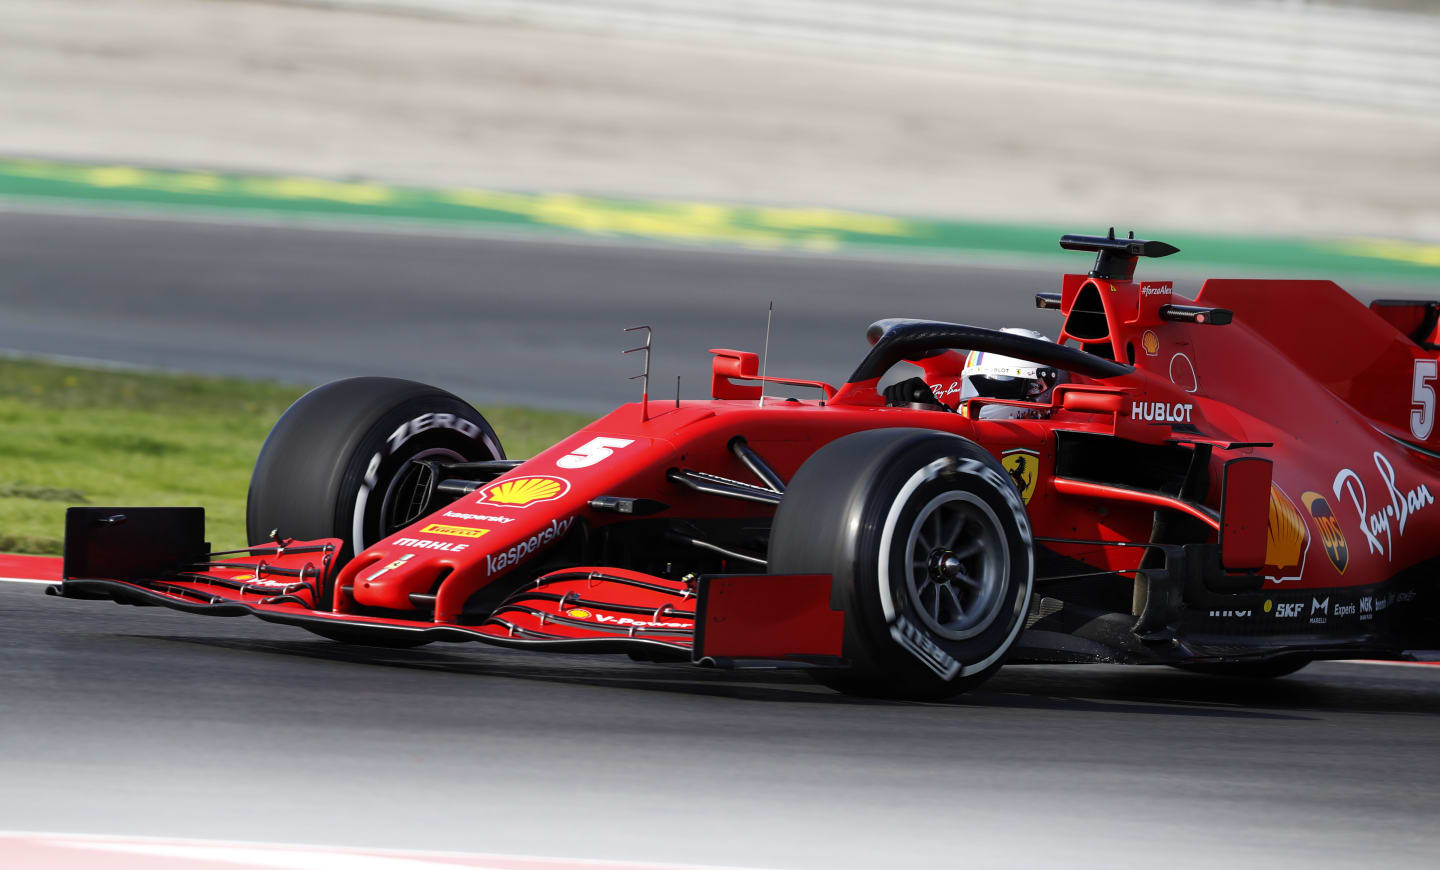 ISTANBUL, TURKEY - NOVEMBER 13: Sebastian Vettel of Germany driving the (5) Scuderia Ferrari SF1000 on track during practice ahead of the F1 Grand Prix of Turkey at Intercity Istanbul Park on November 13, 2020 in Istanbul, Turkey. (Photo by Murad Sezer-Pool/Getty Images)